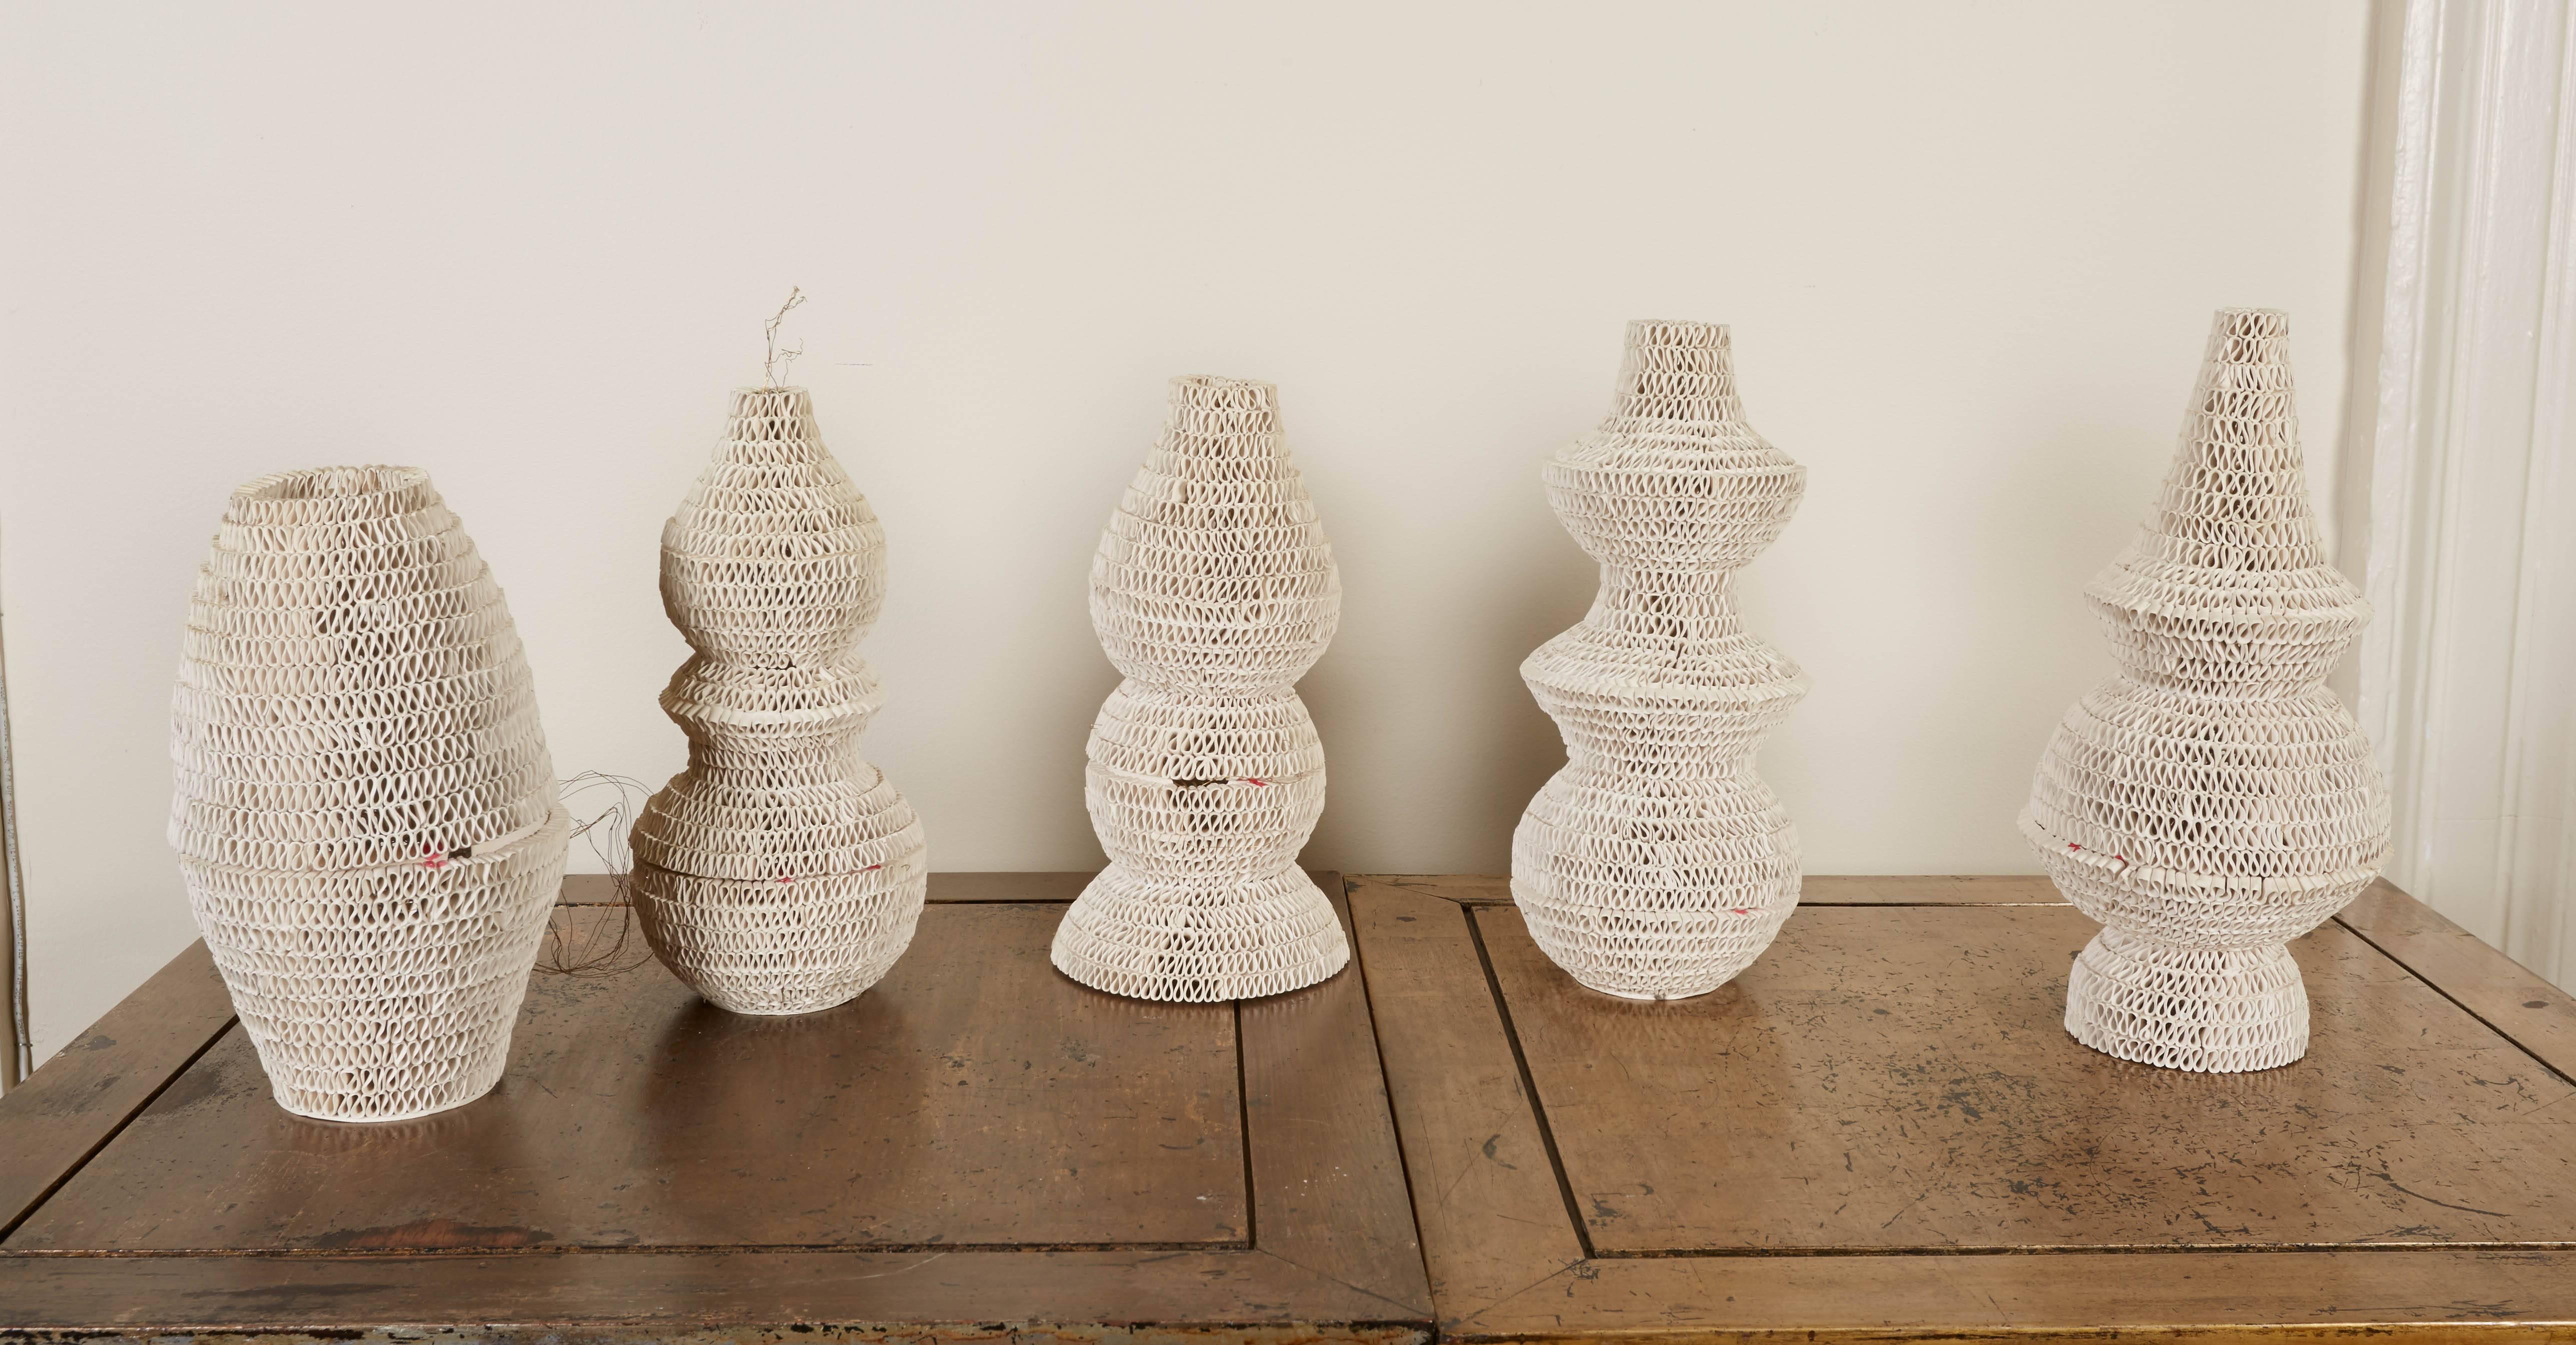 Each of the lanterns a unique form and made of hand-scrolled unglazed white terra cotta. This is the last set from the limited edition of 3 designed by Lucio Romero of prototype zero in collaboration with Piero di Terlizzi. Can also be sold as a set